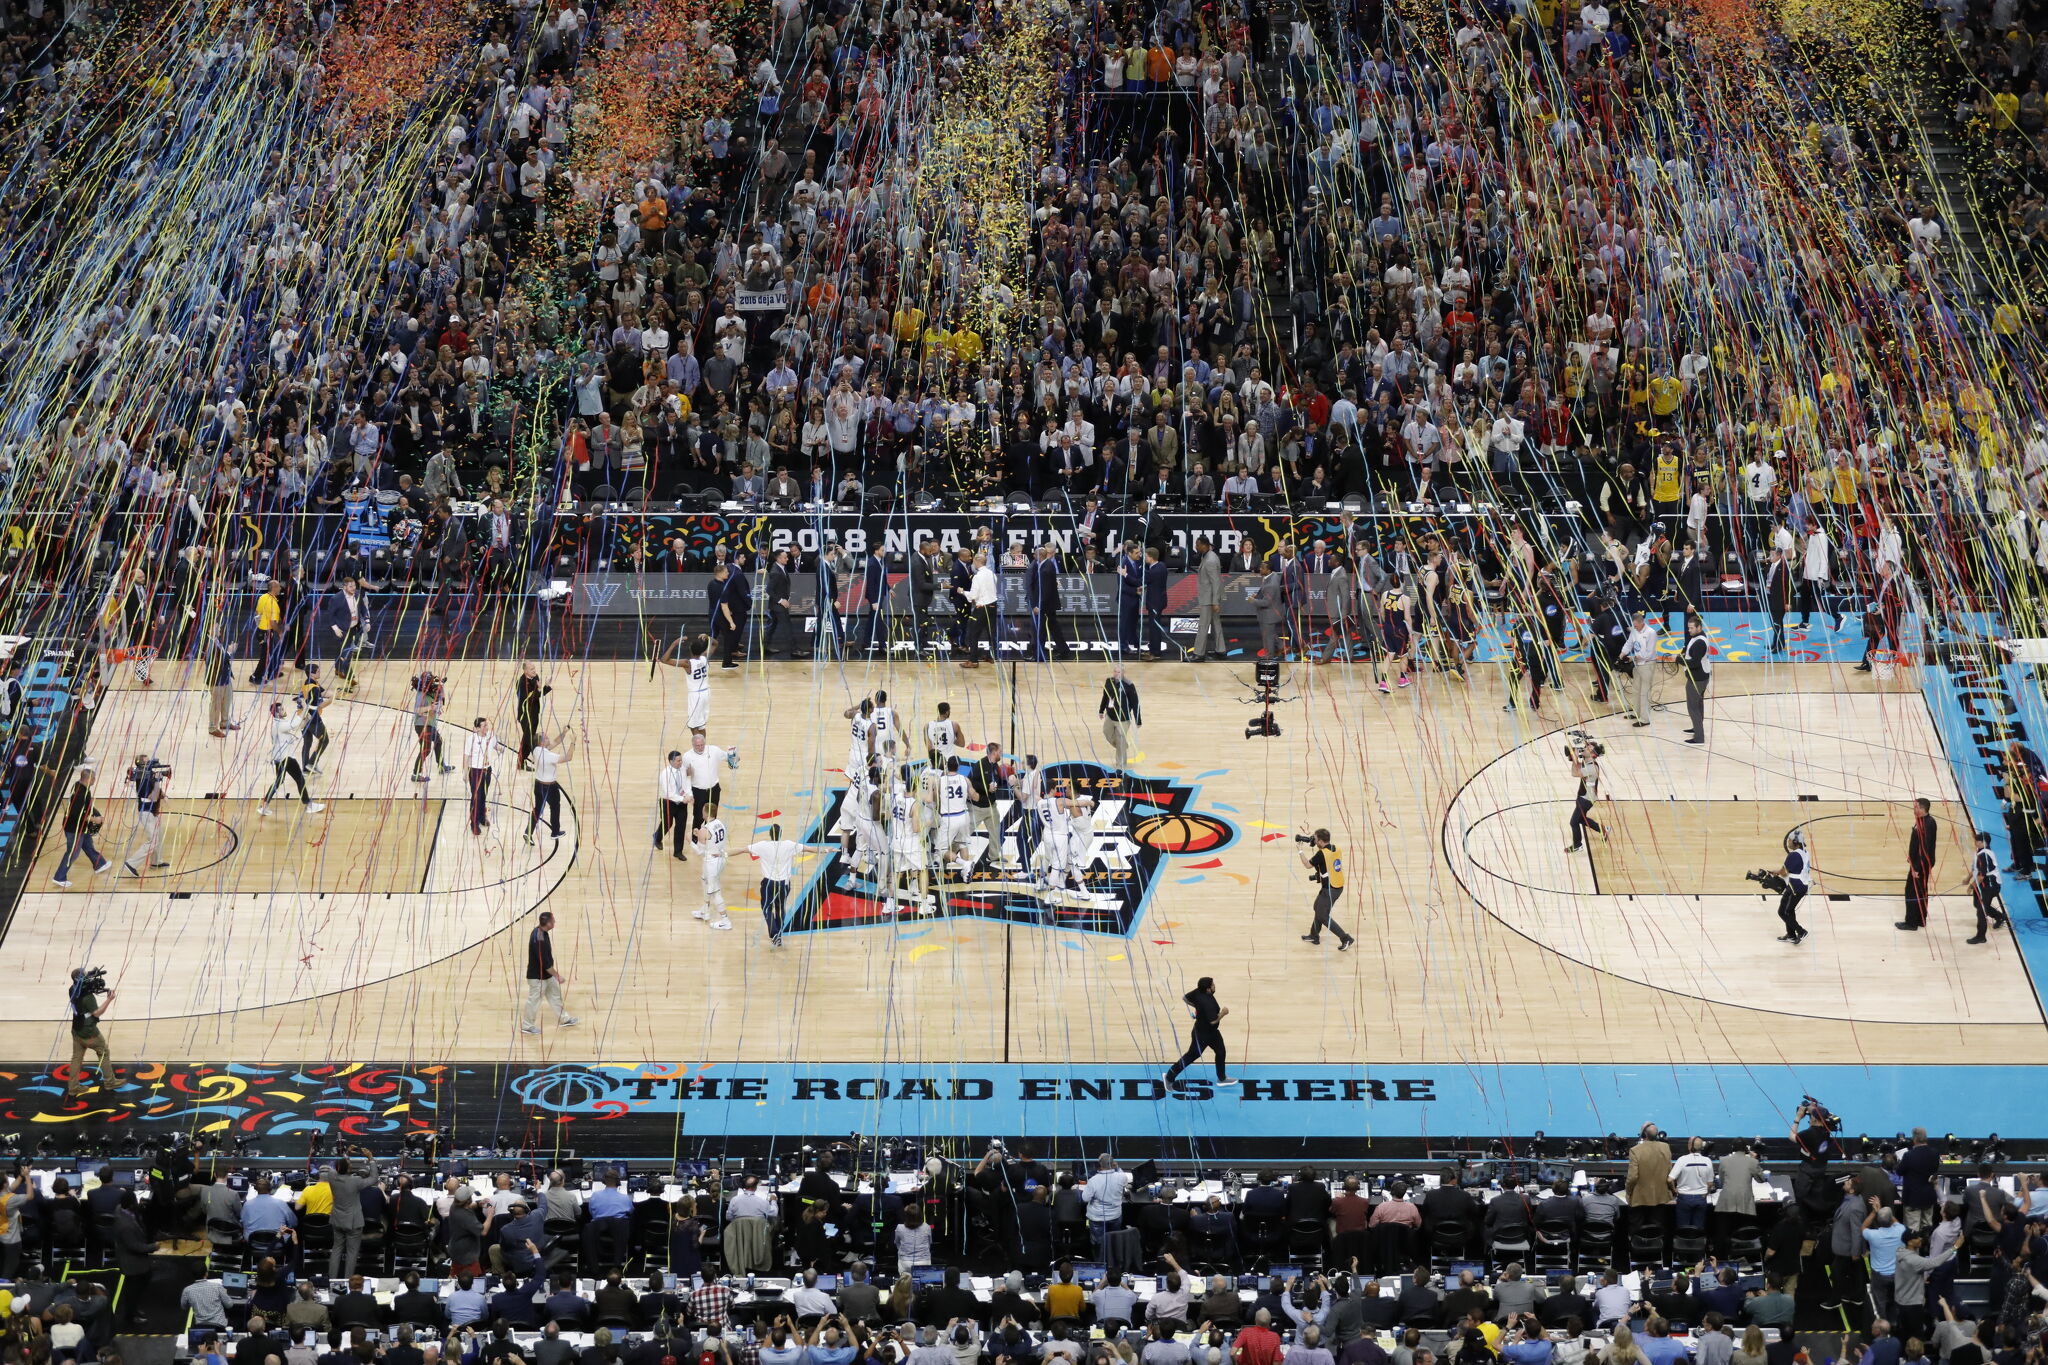 Looking back at iconic moments for the Spurs at the Alamodome